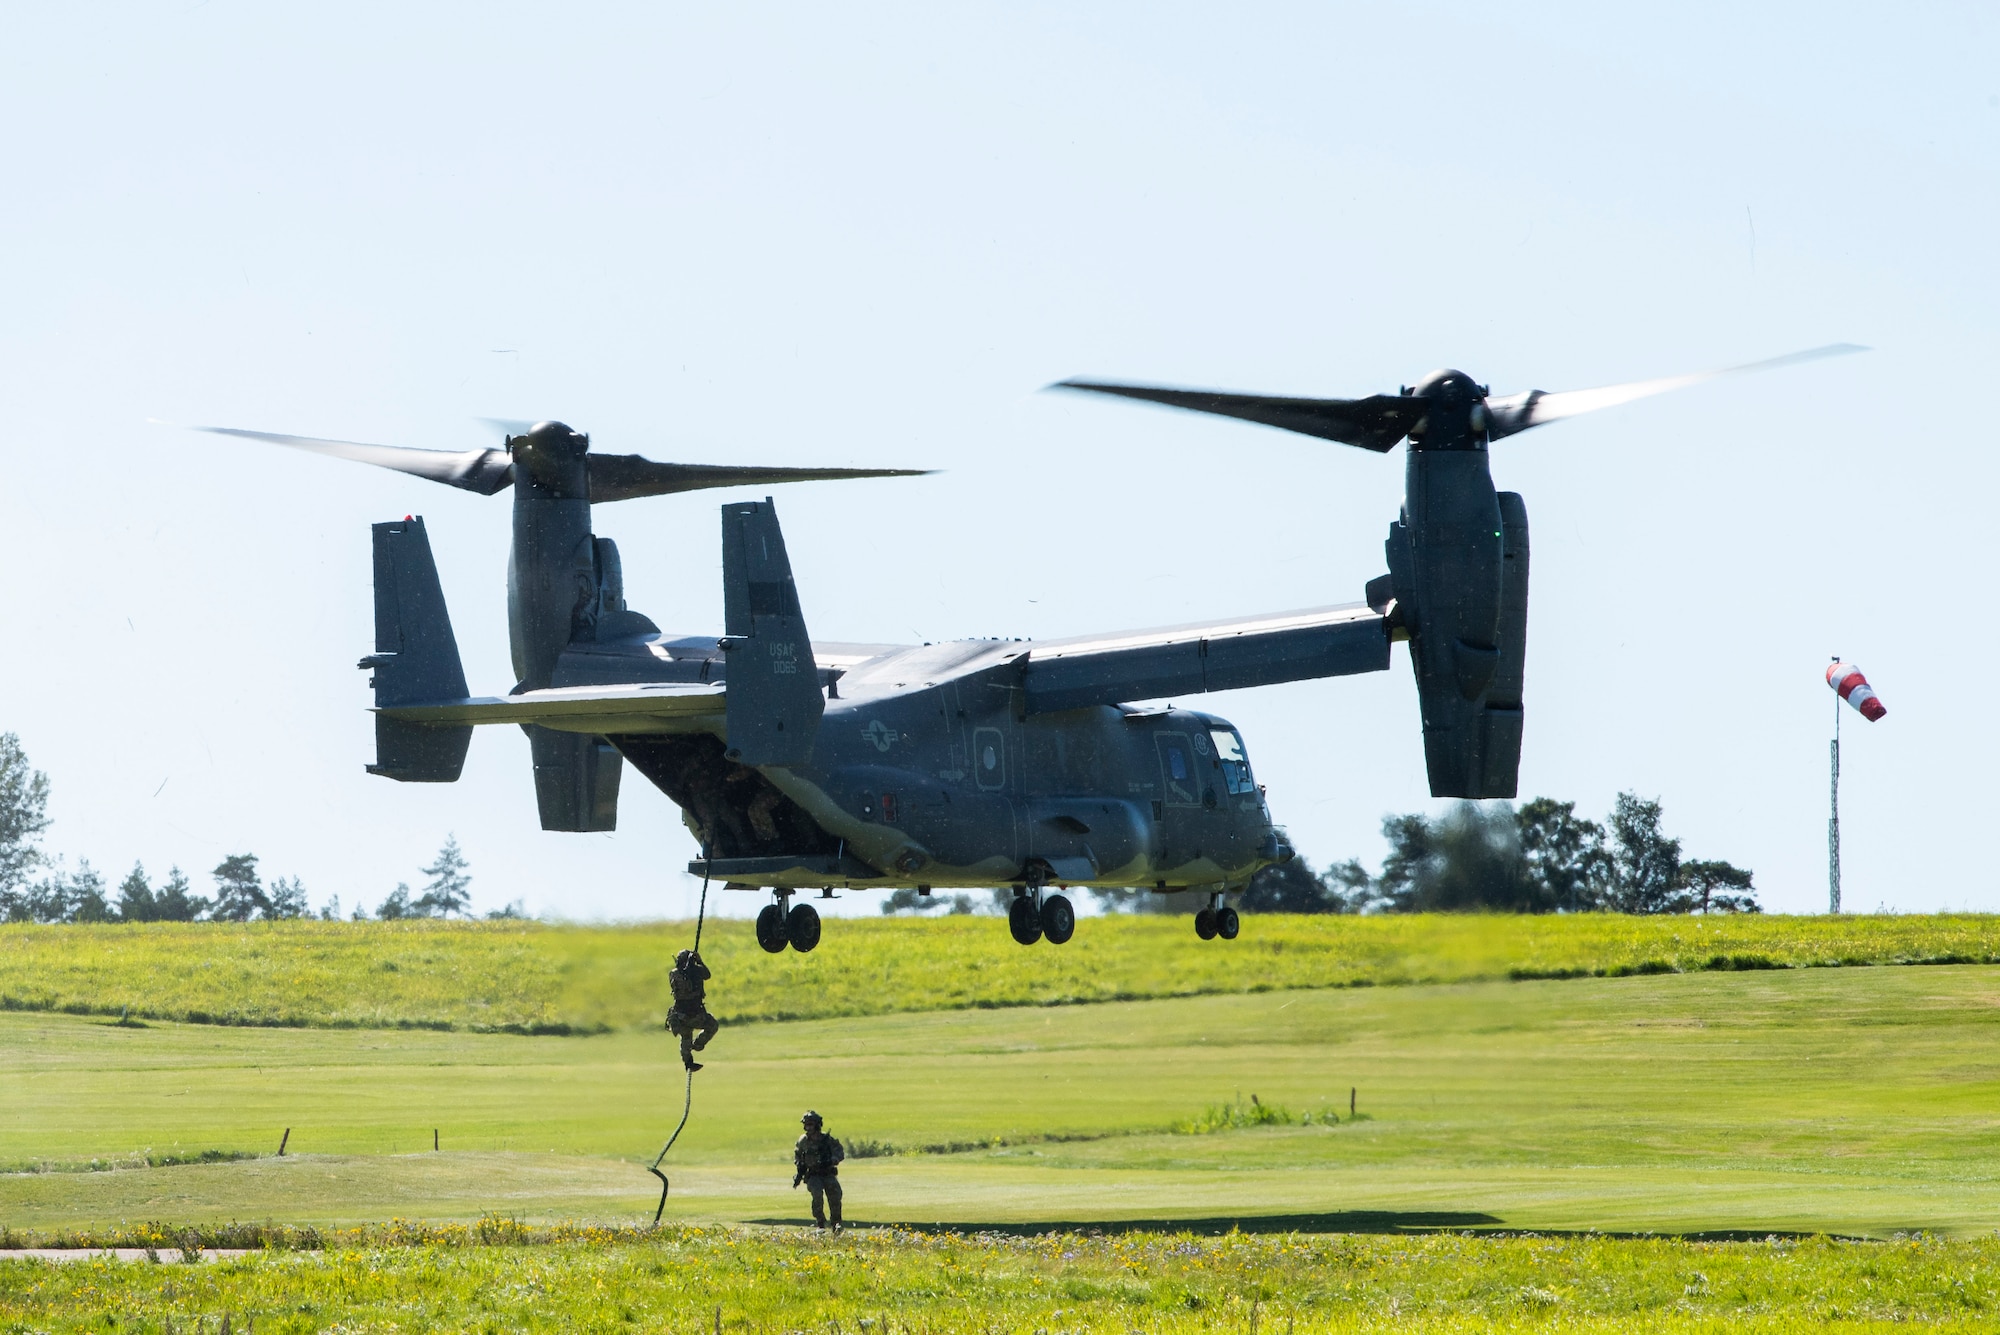 321st Special Tactics Squadron Airmen repel from a CV-22B Osprey, based out of RAF Mildenhall, U.K., during a training mission at Rygge Air Station, Norway, August 25, 2020. Integration with the Norwegian Air Force allowed the 352d Special Operations Wing to enhance and strengthen bonds with our partner nation and further secure the strategic high-north region. The exercise provided training for 352d Special Operations Wing members on capabilities such as personnel recovery, forward area refuel-ing point, aerial refueling, maritime craft delivery system, and fast rope training. (U.S. Air Force photo by Staff Sgt. Michael Washburn)